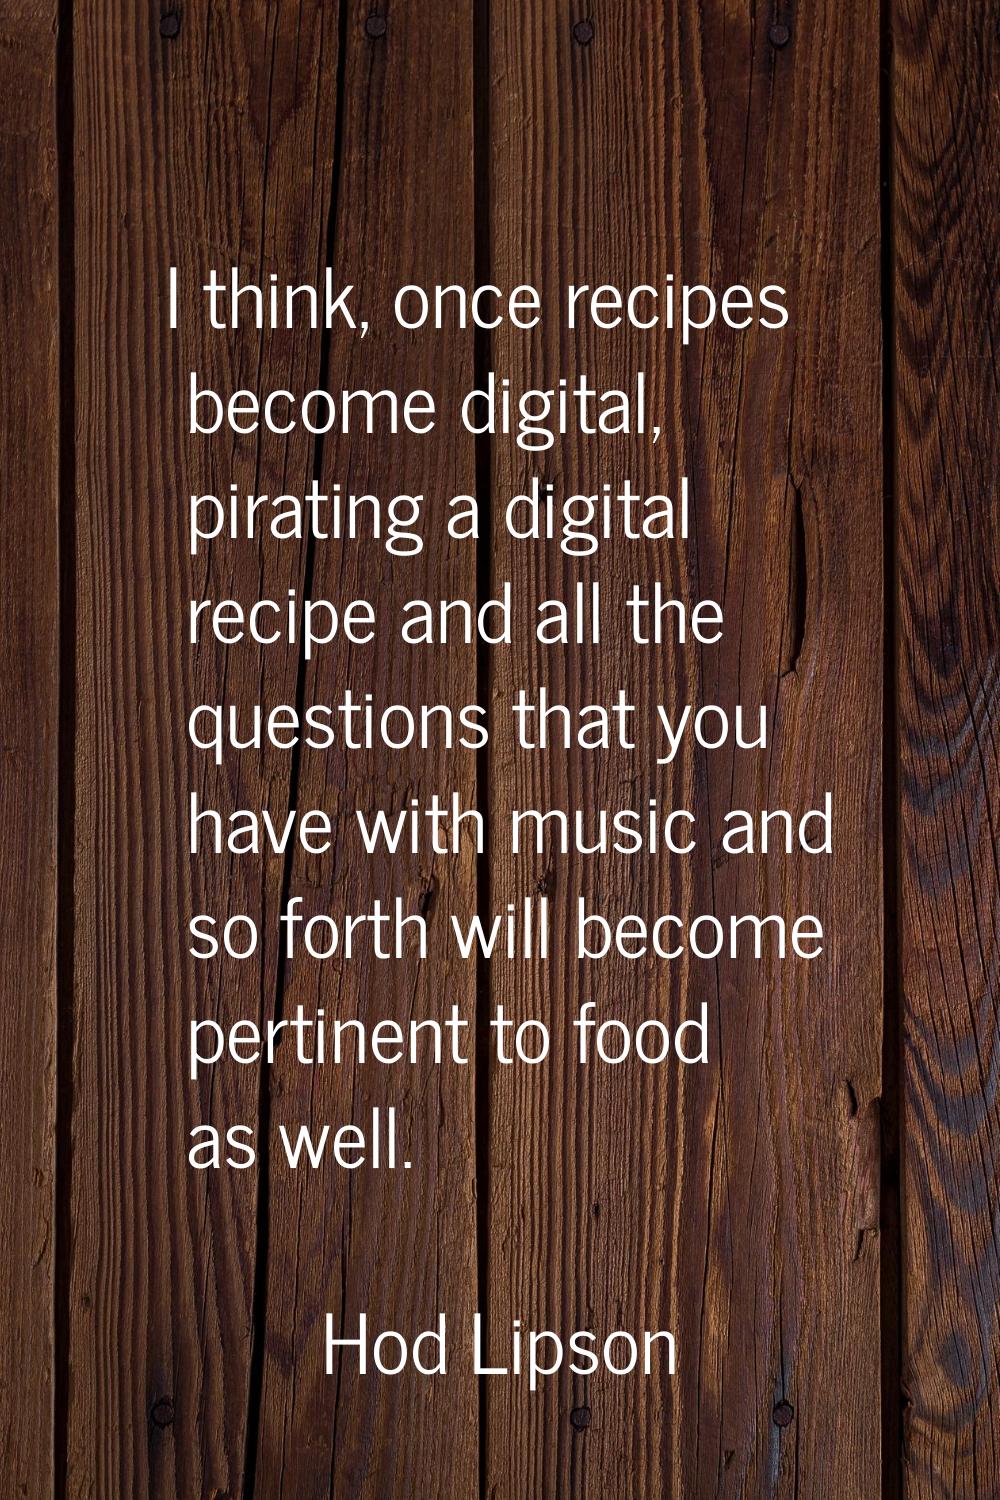 I think, once recipes become digital, pirating a digital recipe and all the questions that you have